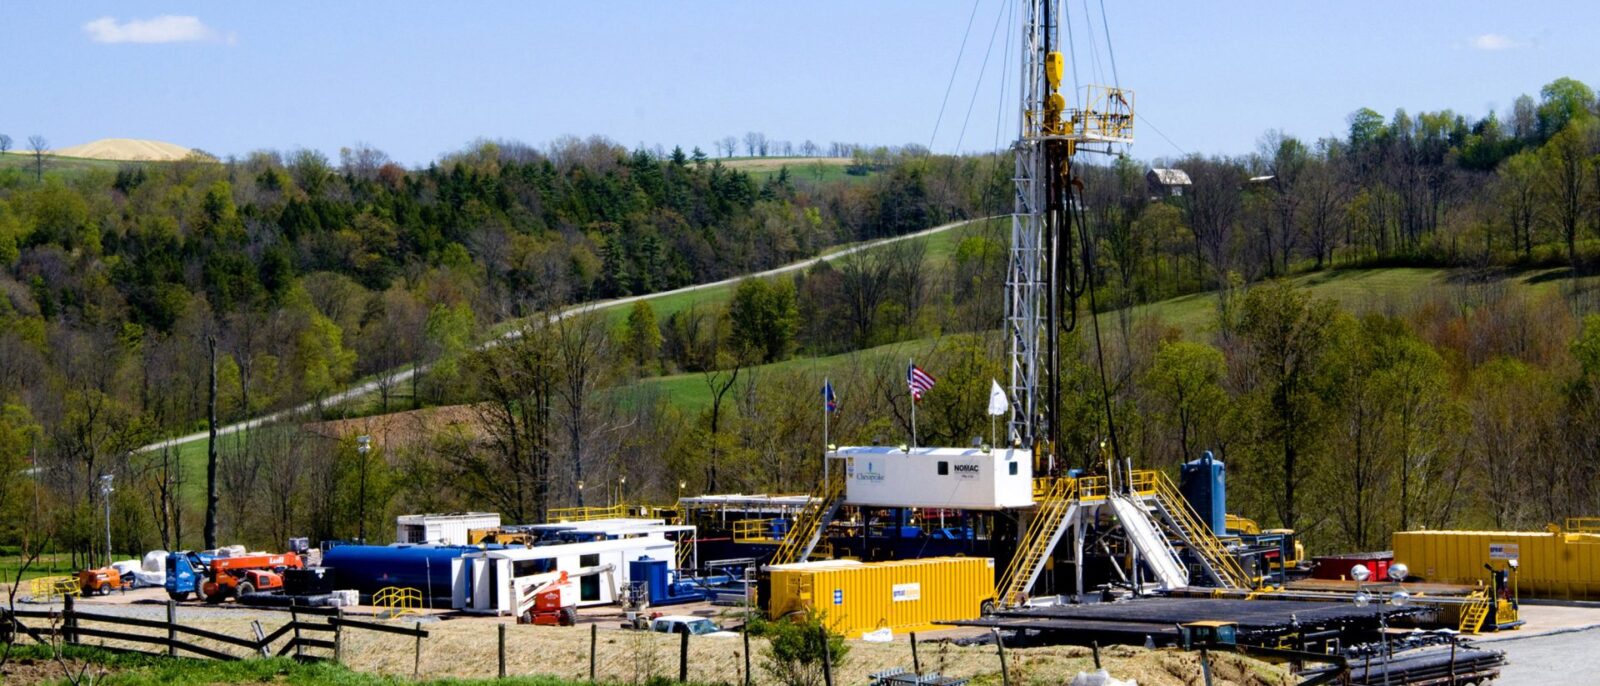 HU professor discusses methane leaks, gas industry image with NPR